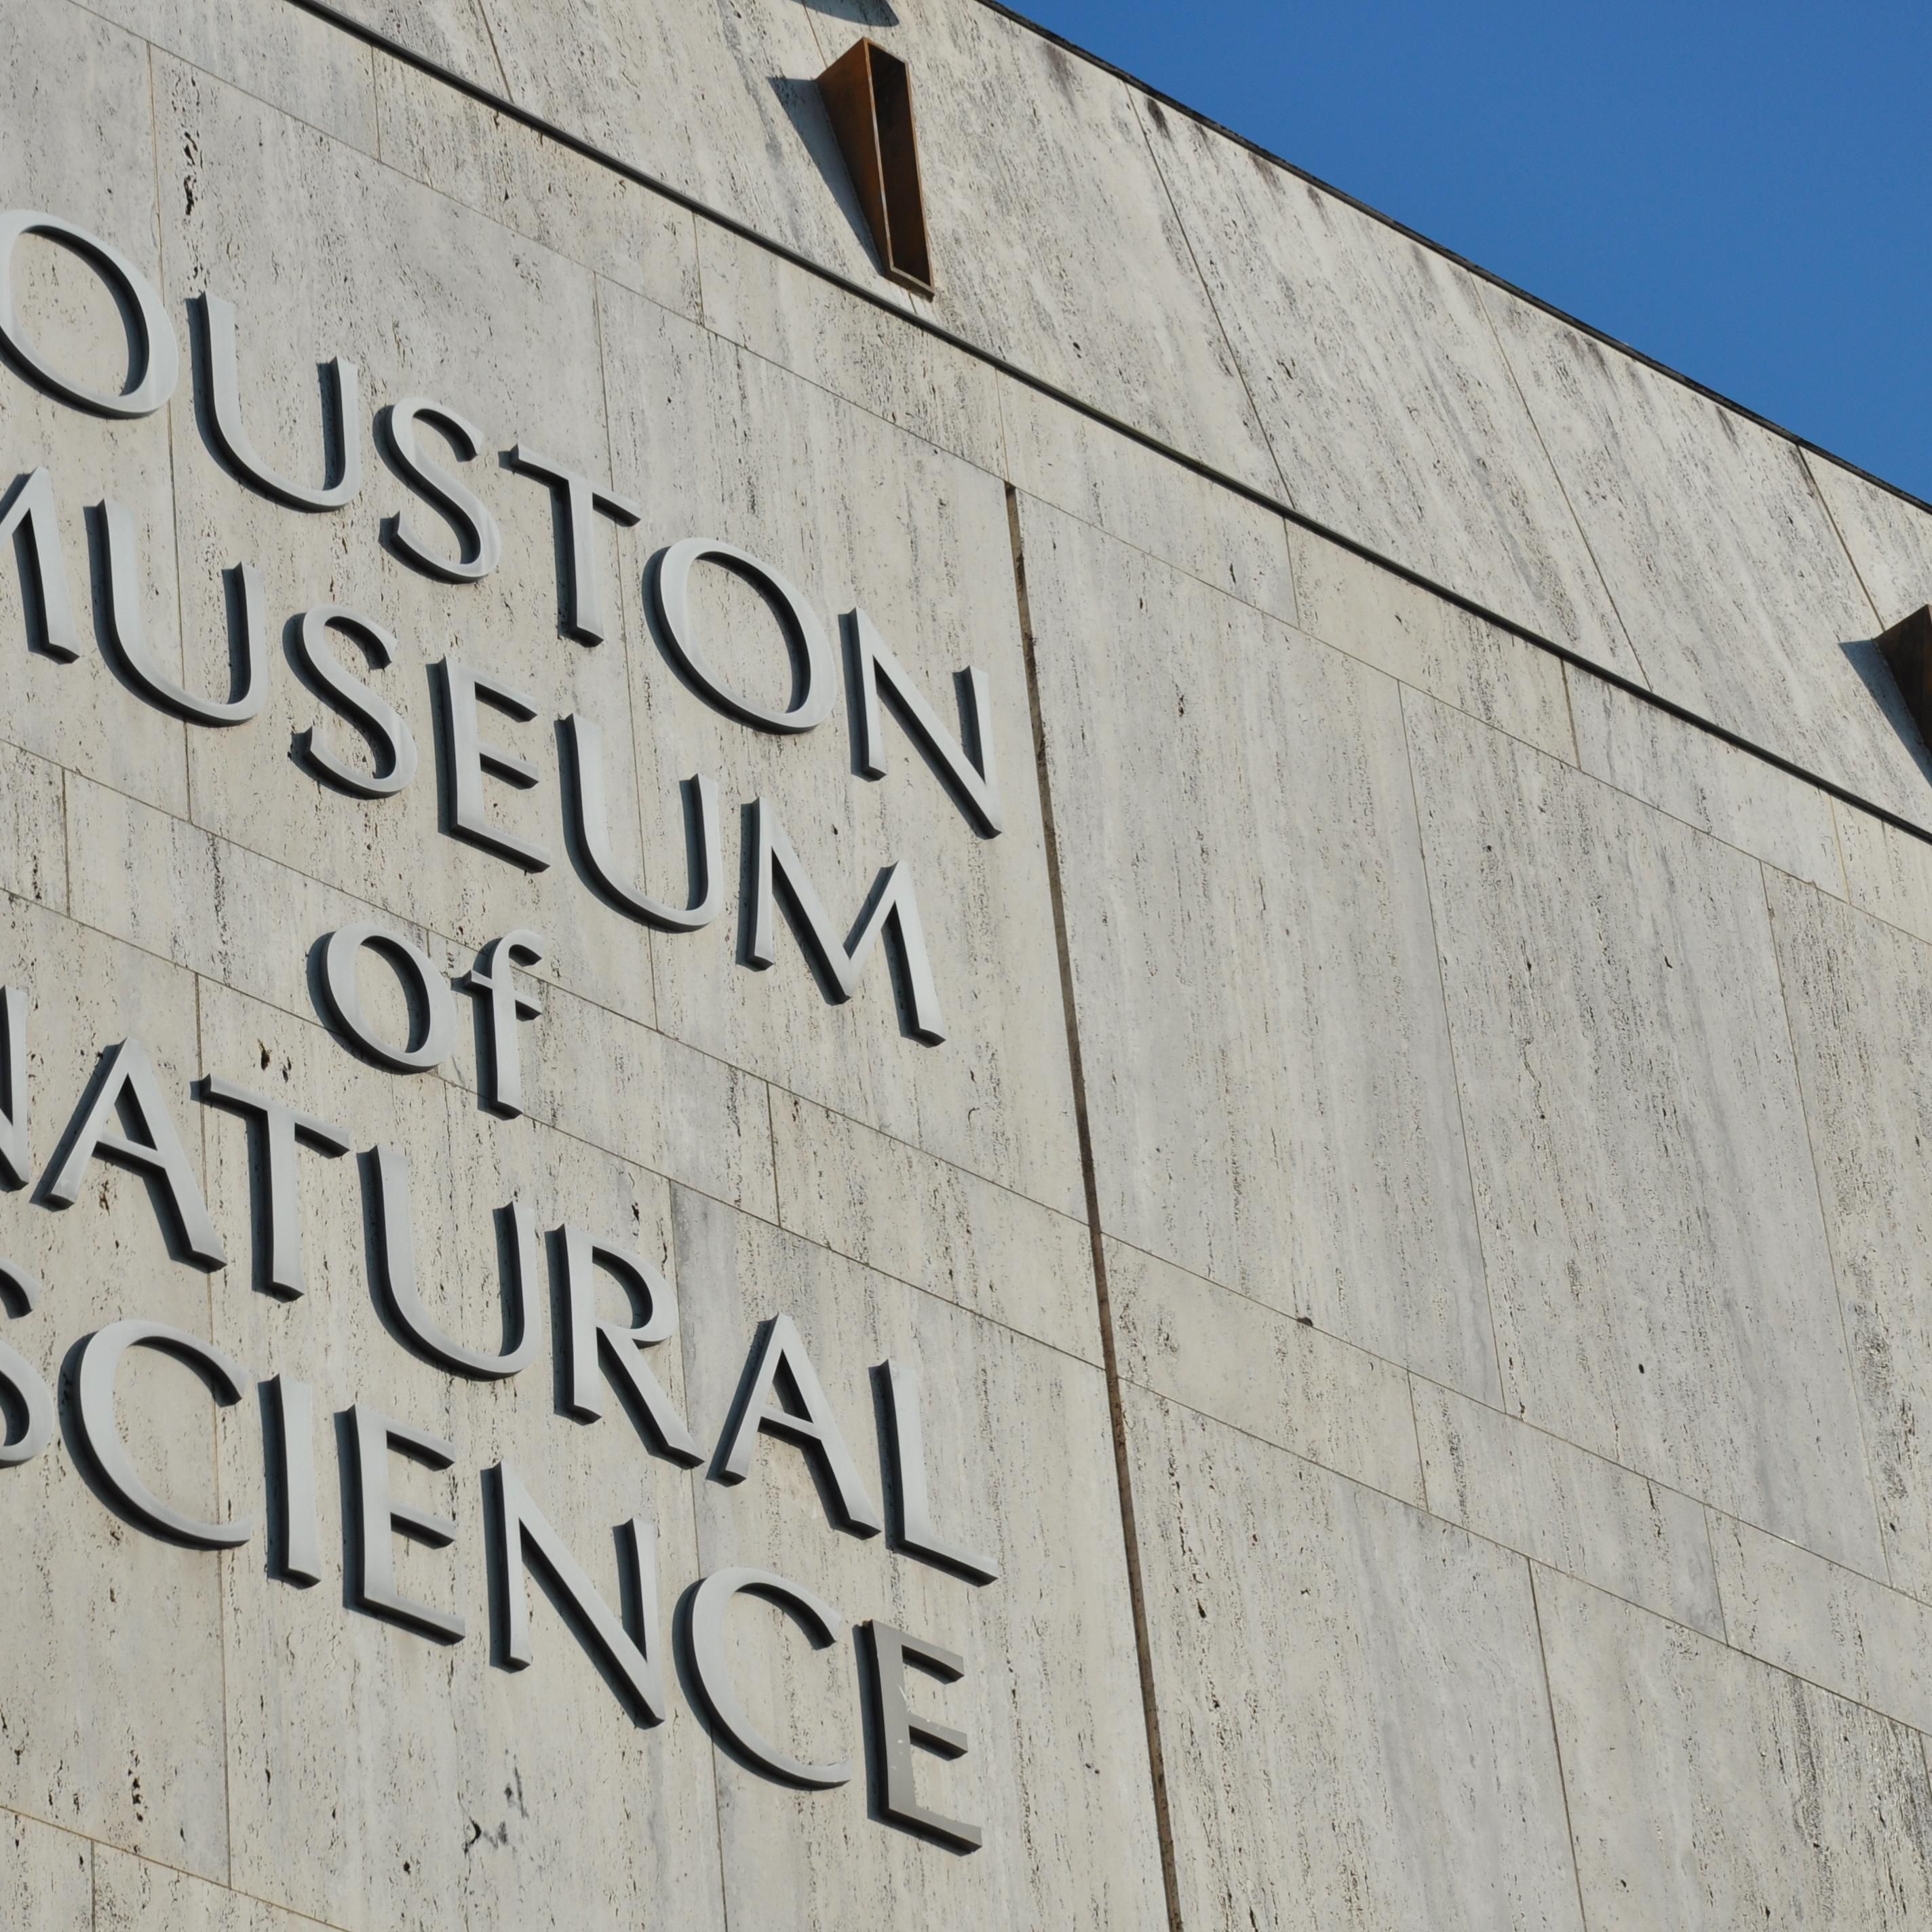 The Houston Museum of Natural Science is just a few miles away.